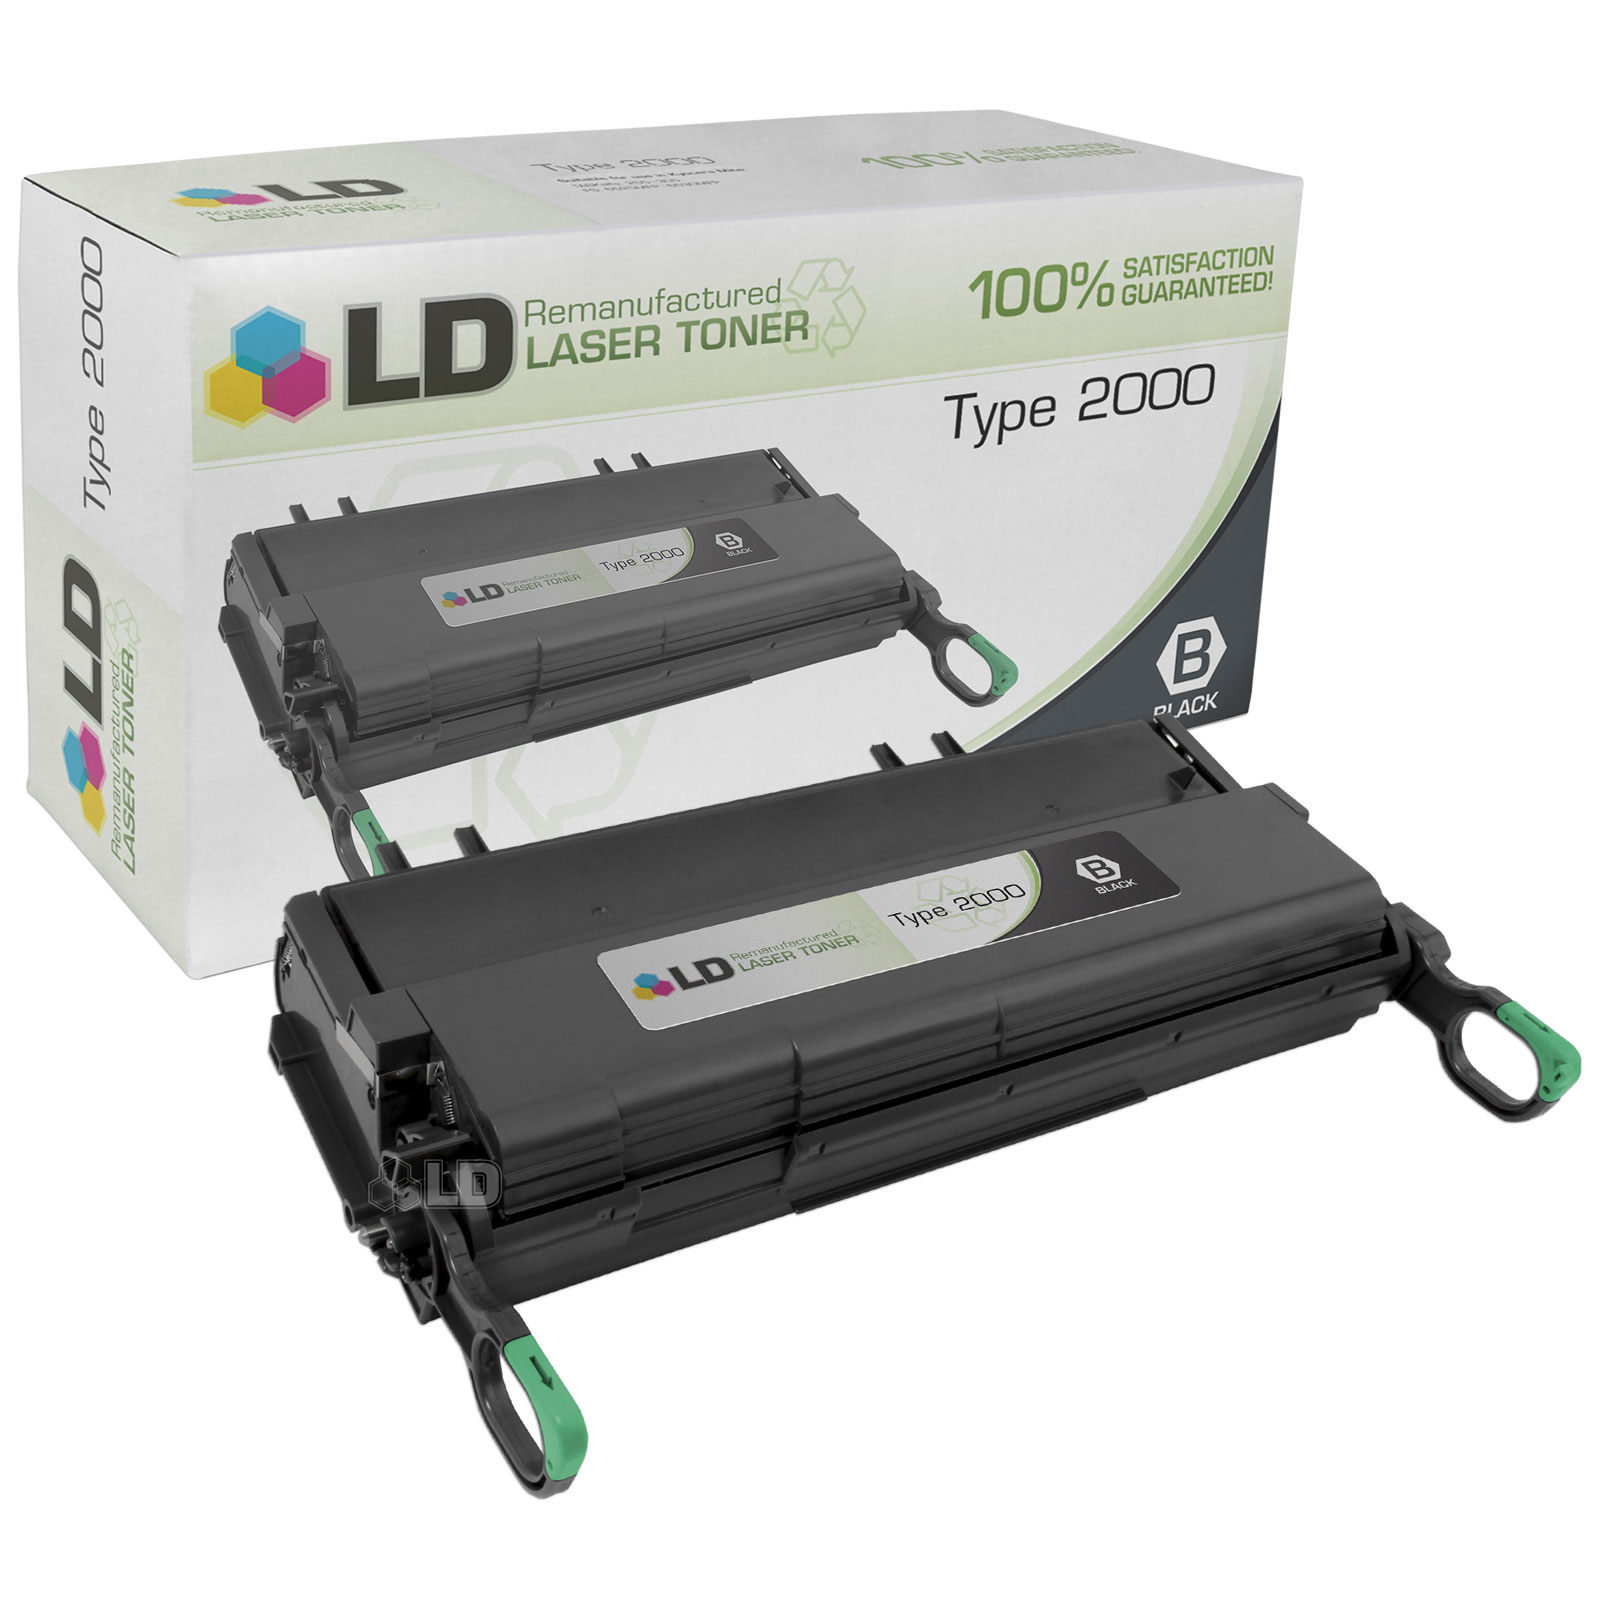 LD Remanufactured Replacement for Canon Ricoh 400394 (Type 2000) Black Laser Toner Cartridge for use in Ricoh AP2000, and AP2100 s - image 1 of 1